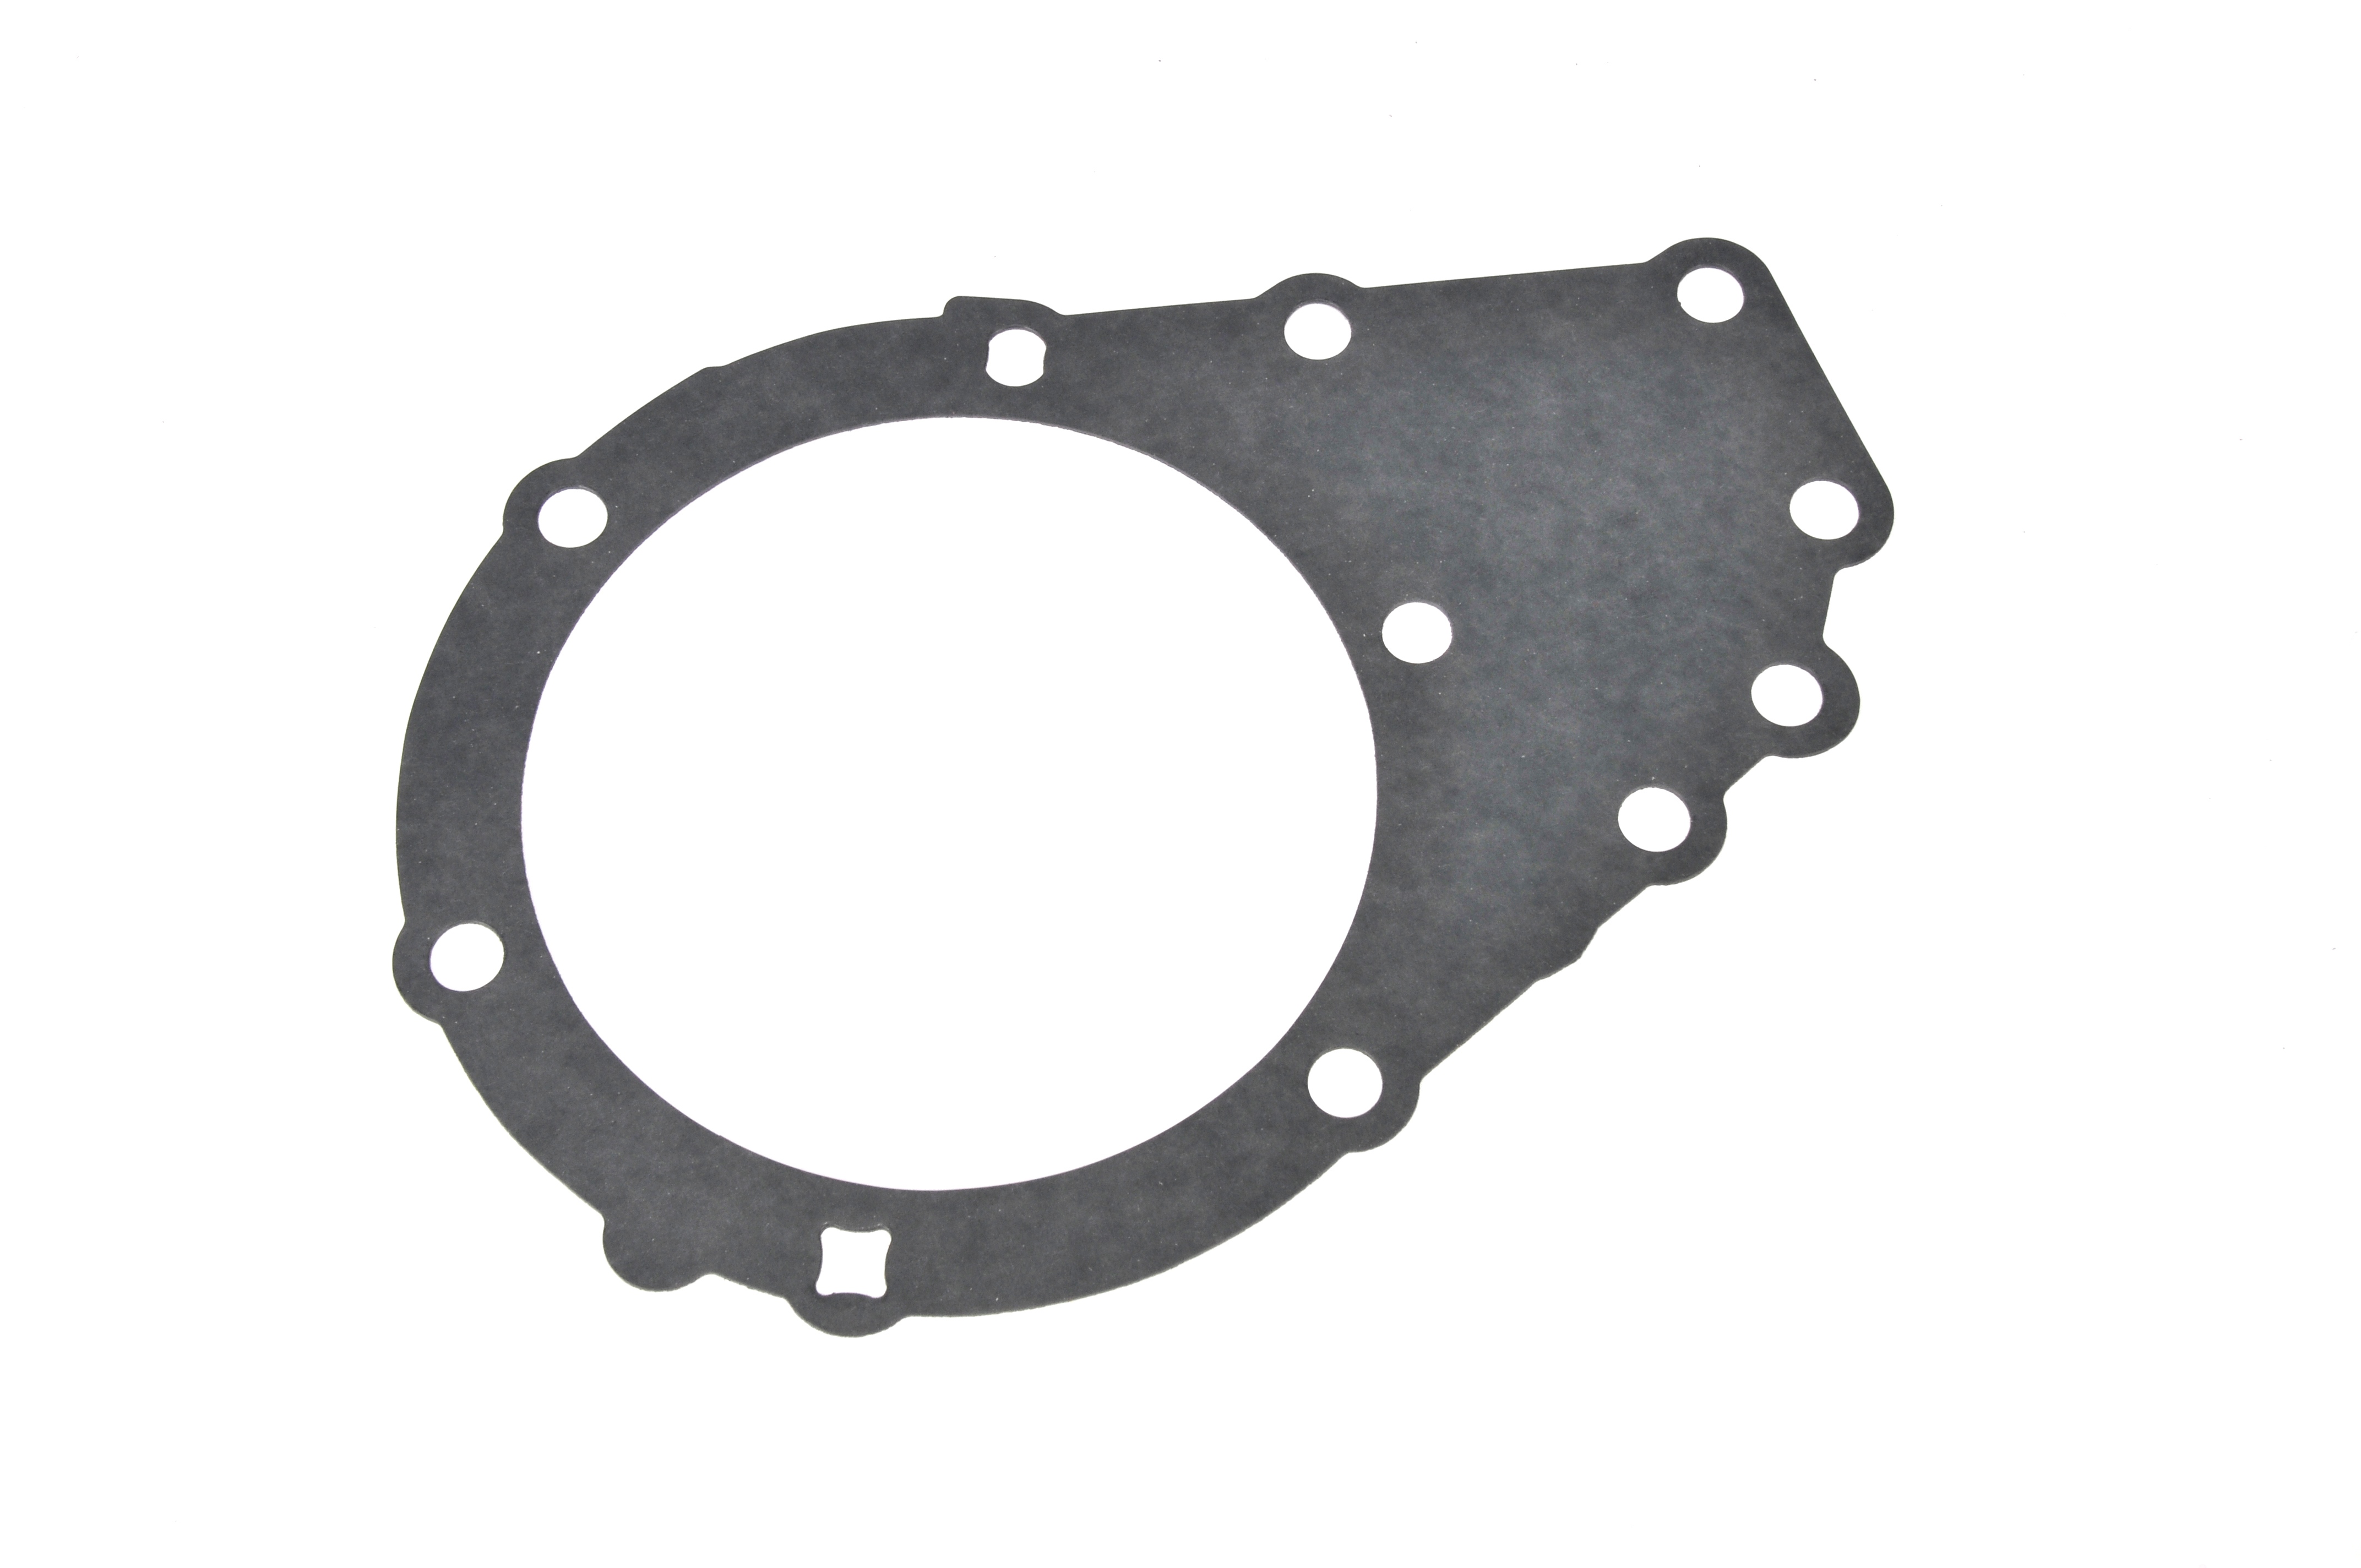 GM GENUINE PARTS - Transfer Case Adapter Gasket - GMP 84003884